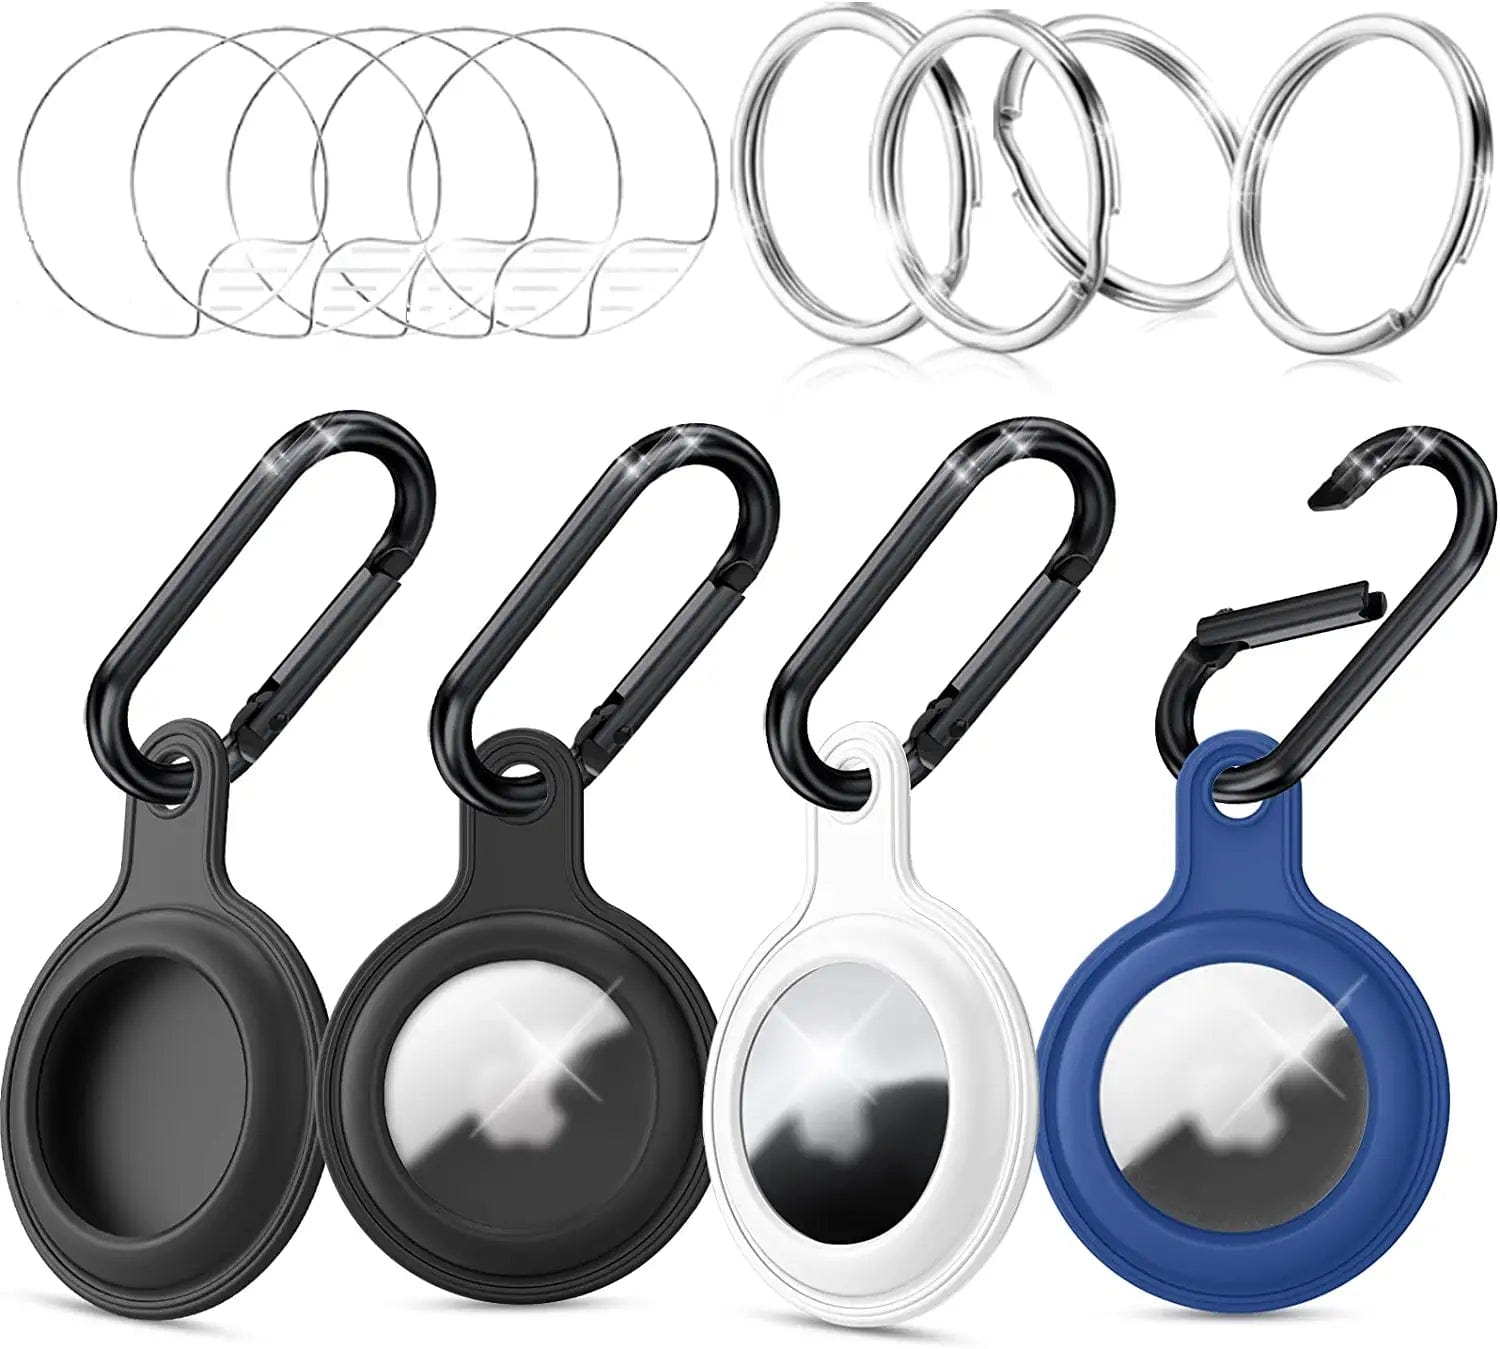 4 Pack Silicone Case for Airtags with Screen Protector Carabiner Keychain Key Ring, Protective Cover Compatible with Apple Airtag Key Finder Tracker Pet Dog Necklace Collar Holder, Air Tag Accessories